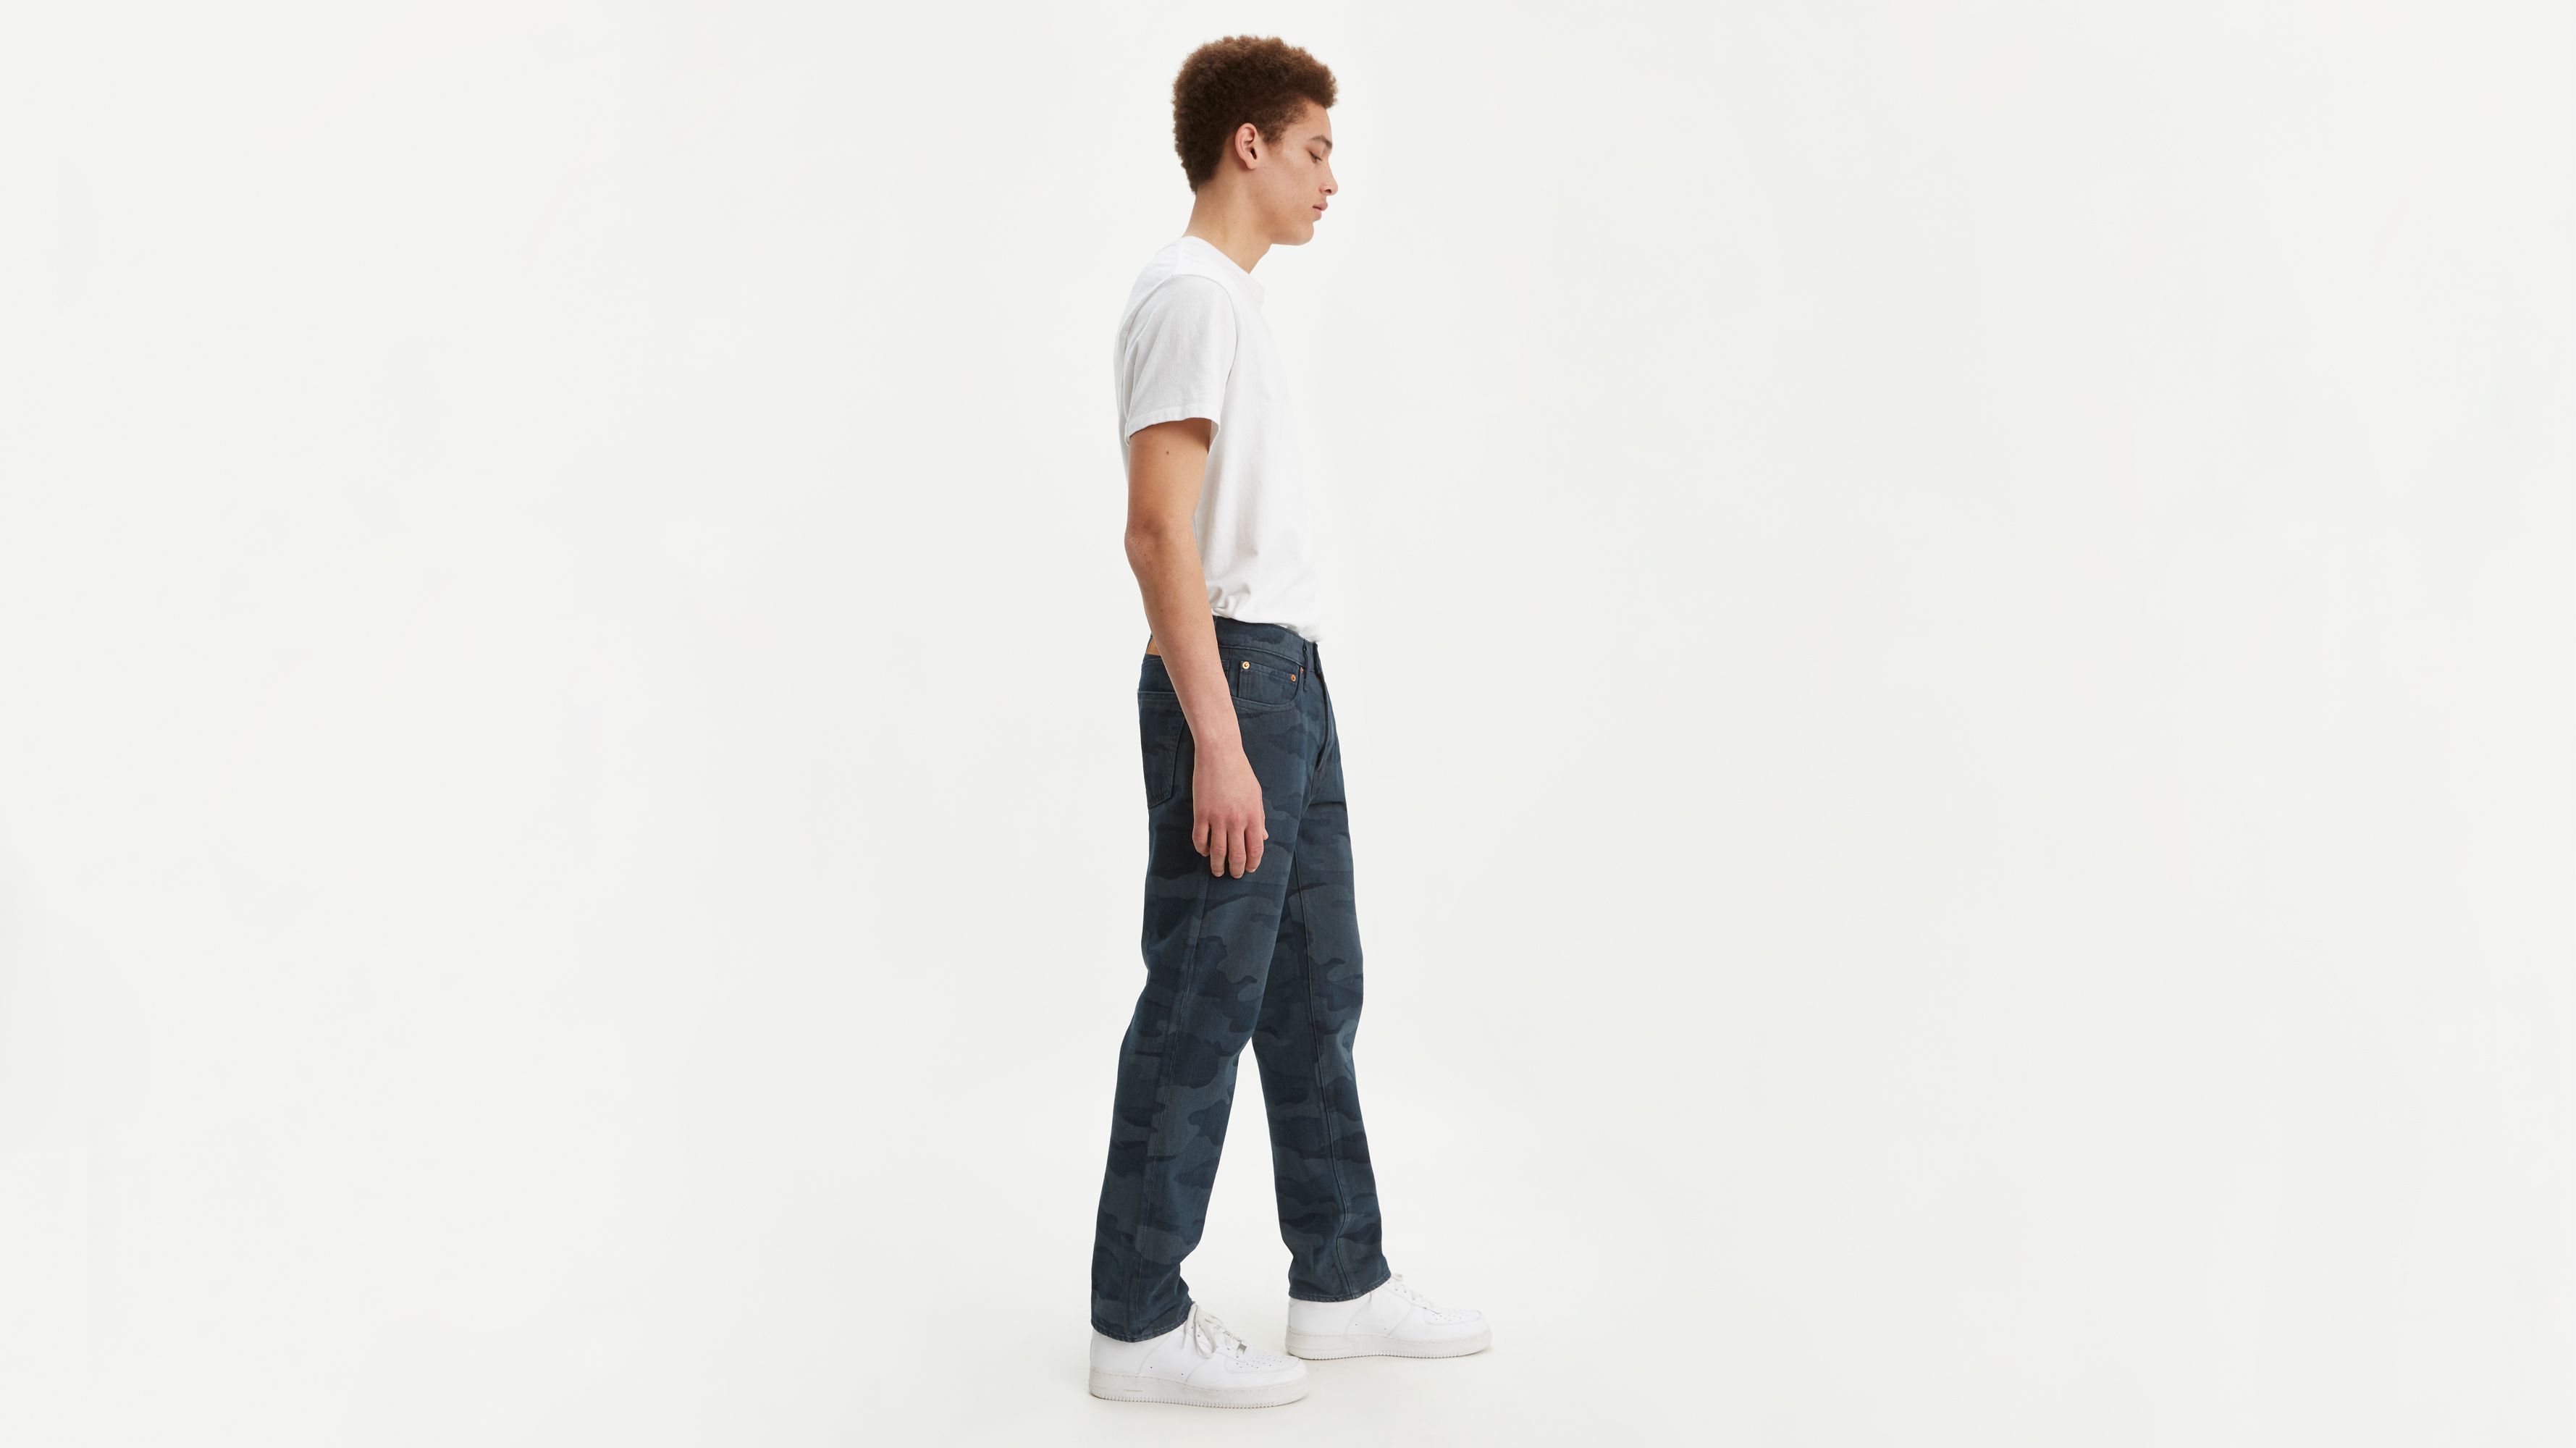 levi's 541 athletic fit tapered